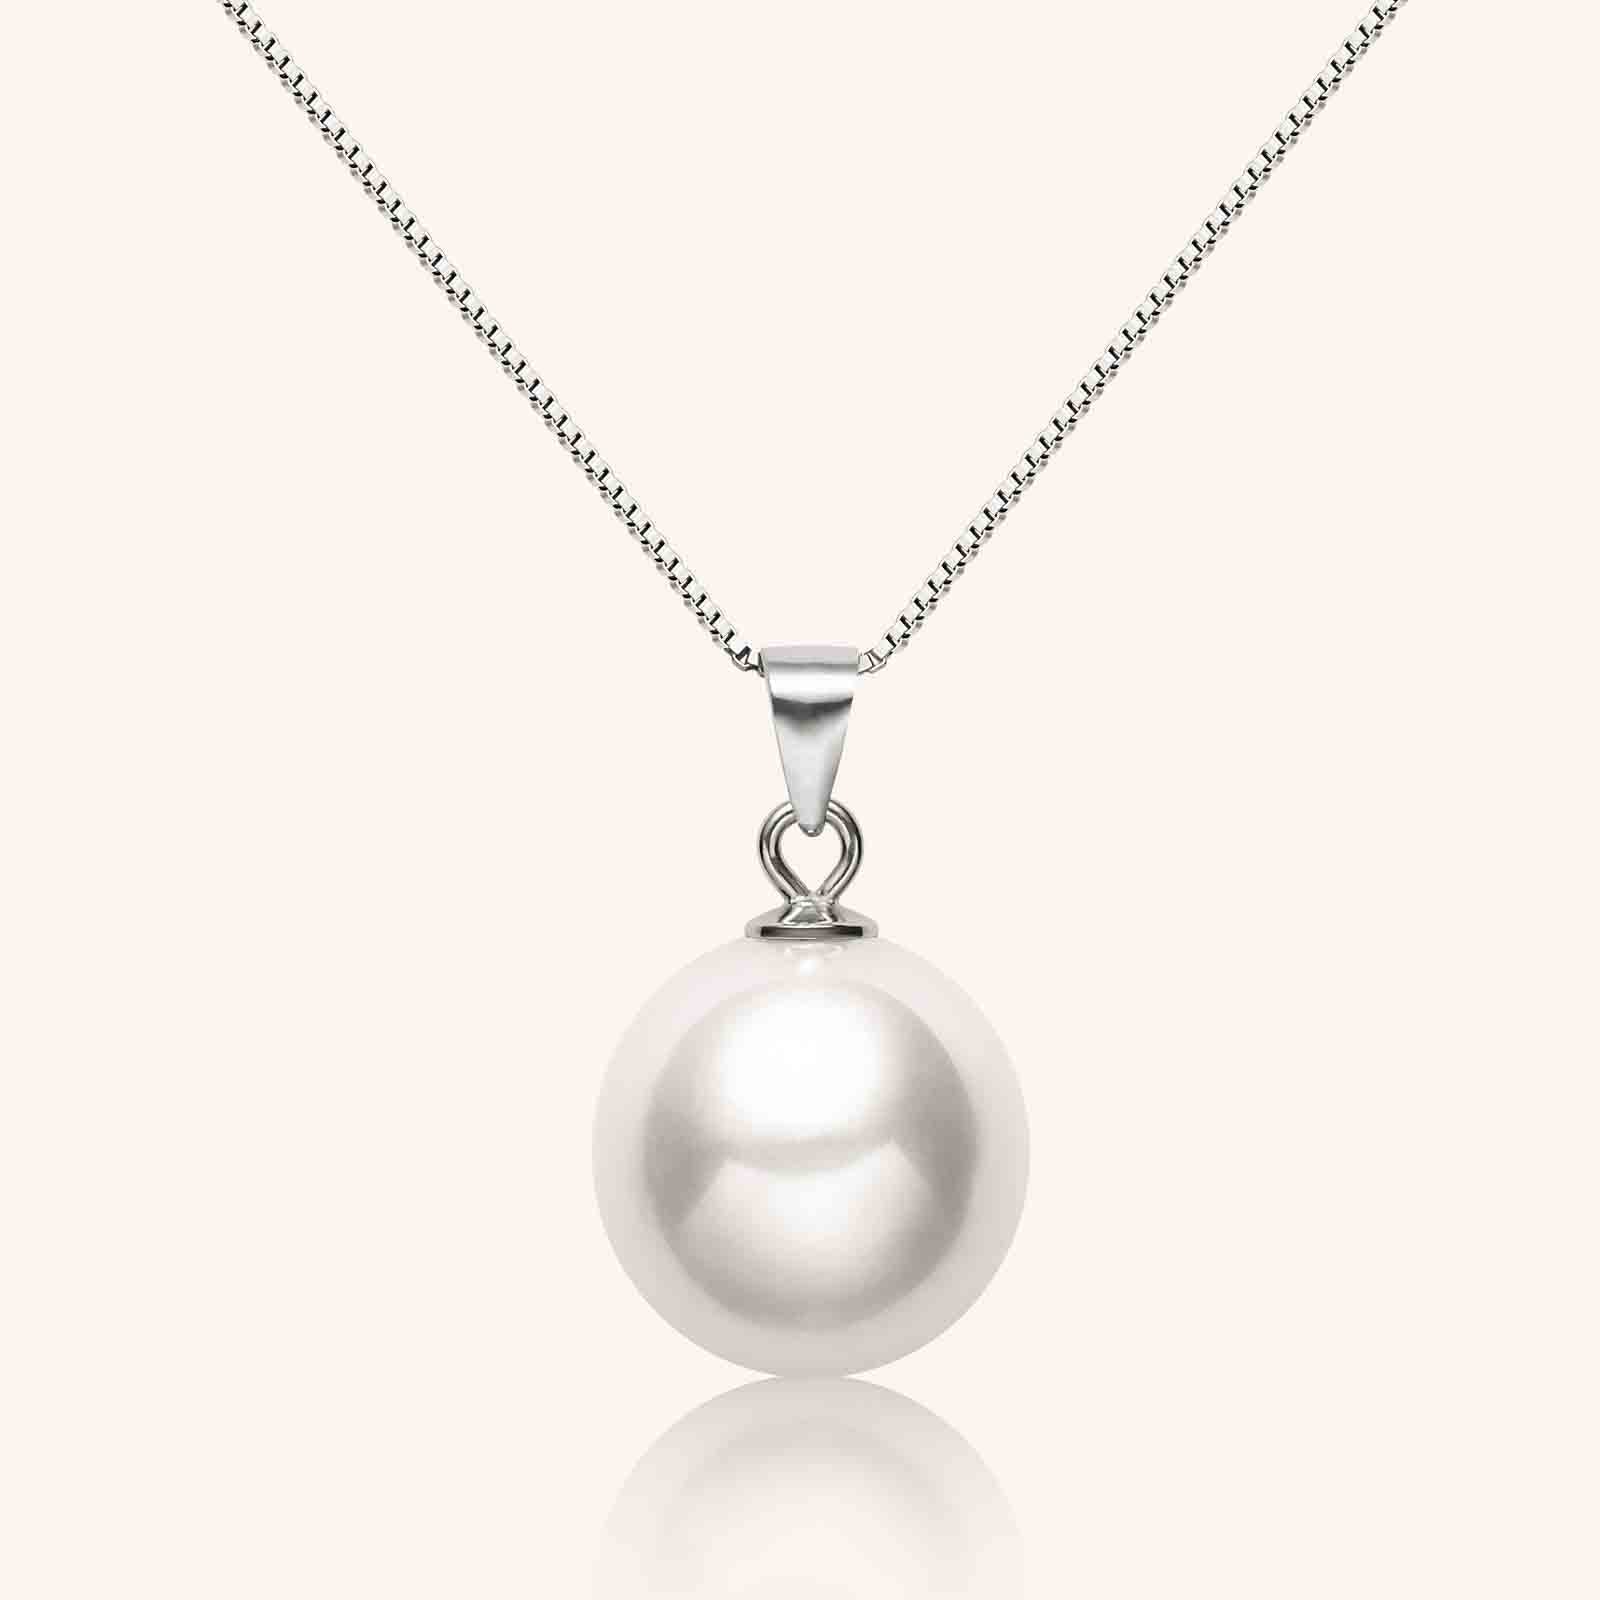 S925 sterling silver necklace with Japanese Mabe Pearl | Bijood Accessories